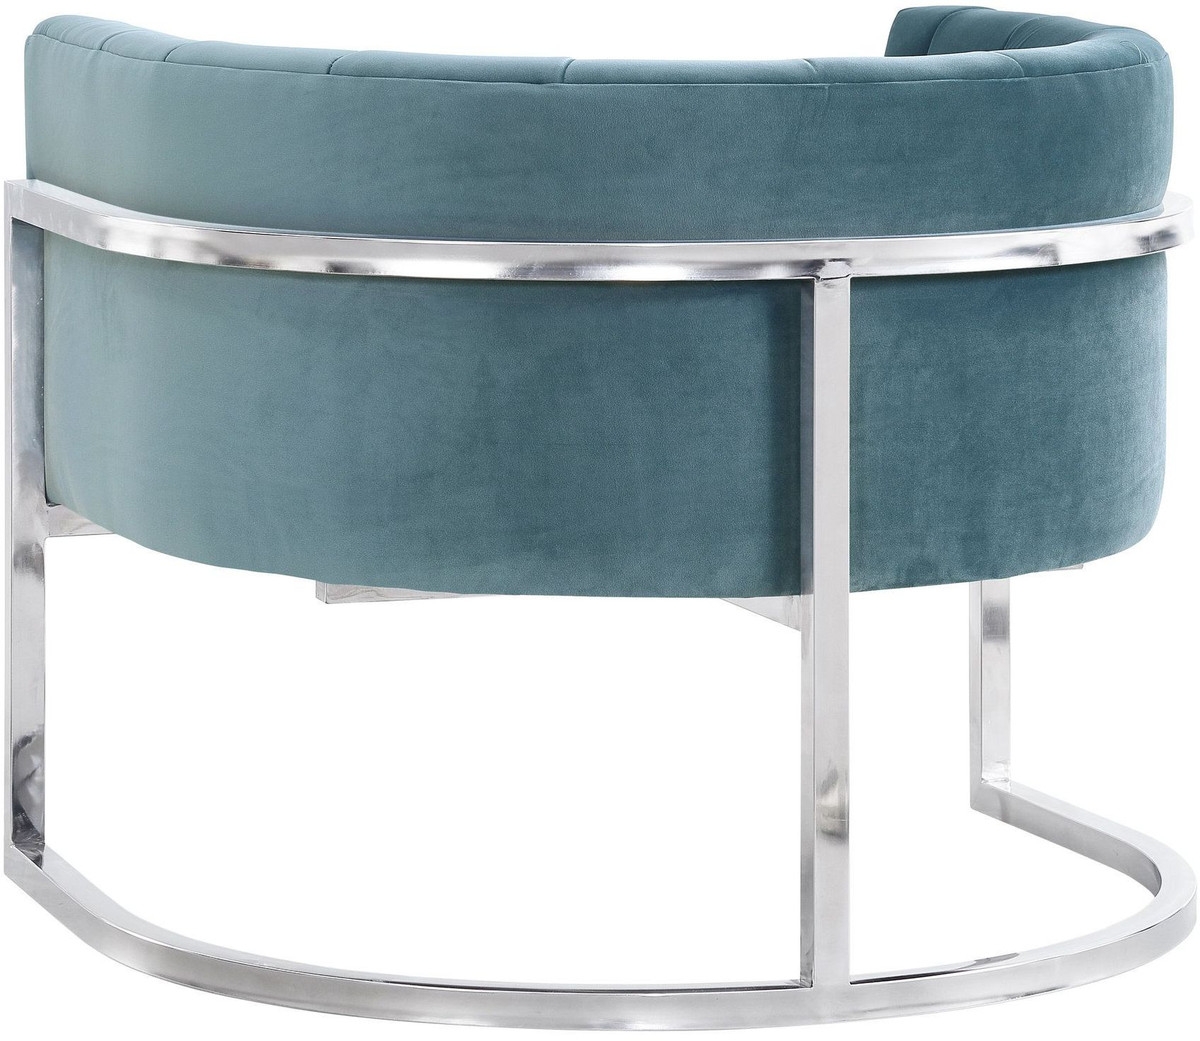 Magnolia Sea Blue Chair with Silver Base - Image 3